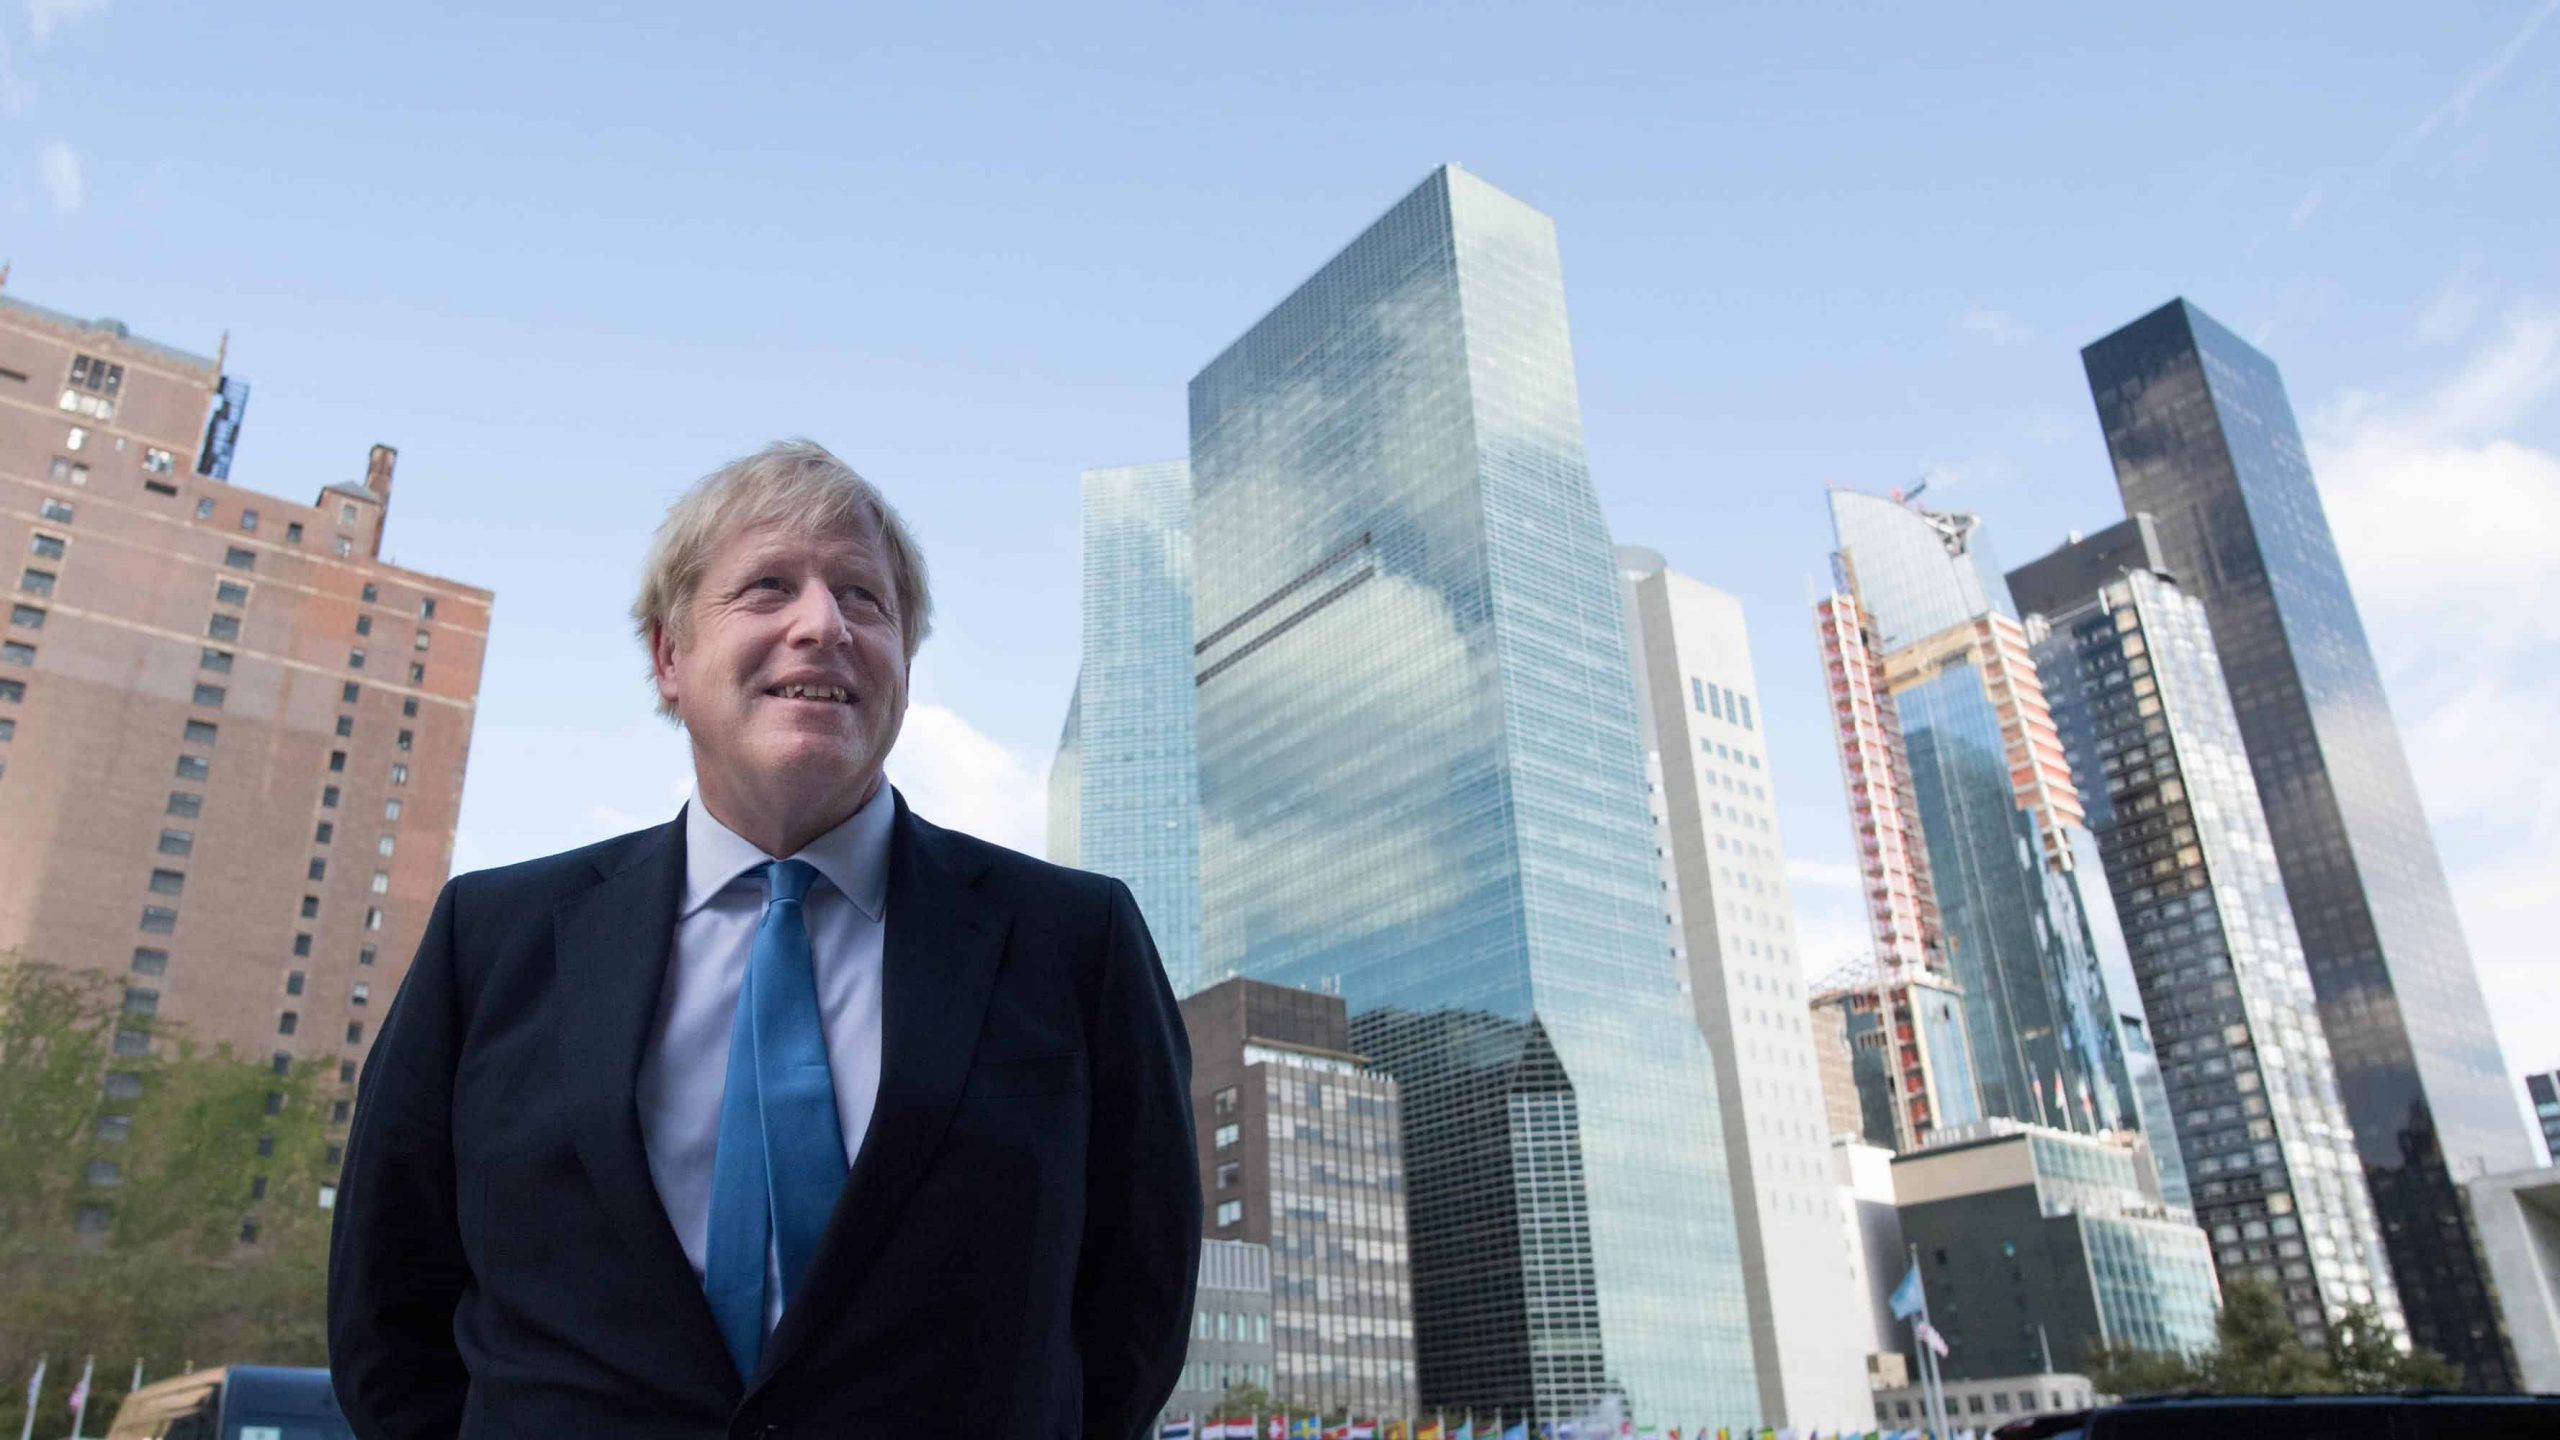 Boris Johnson’s deal will cost Britain £130bn in lost GDP, according to government figures